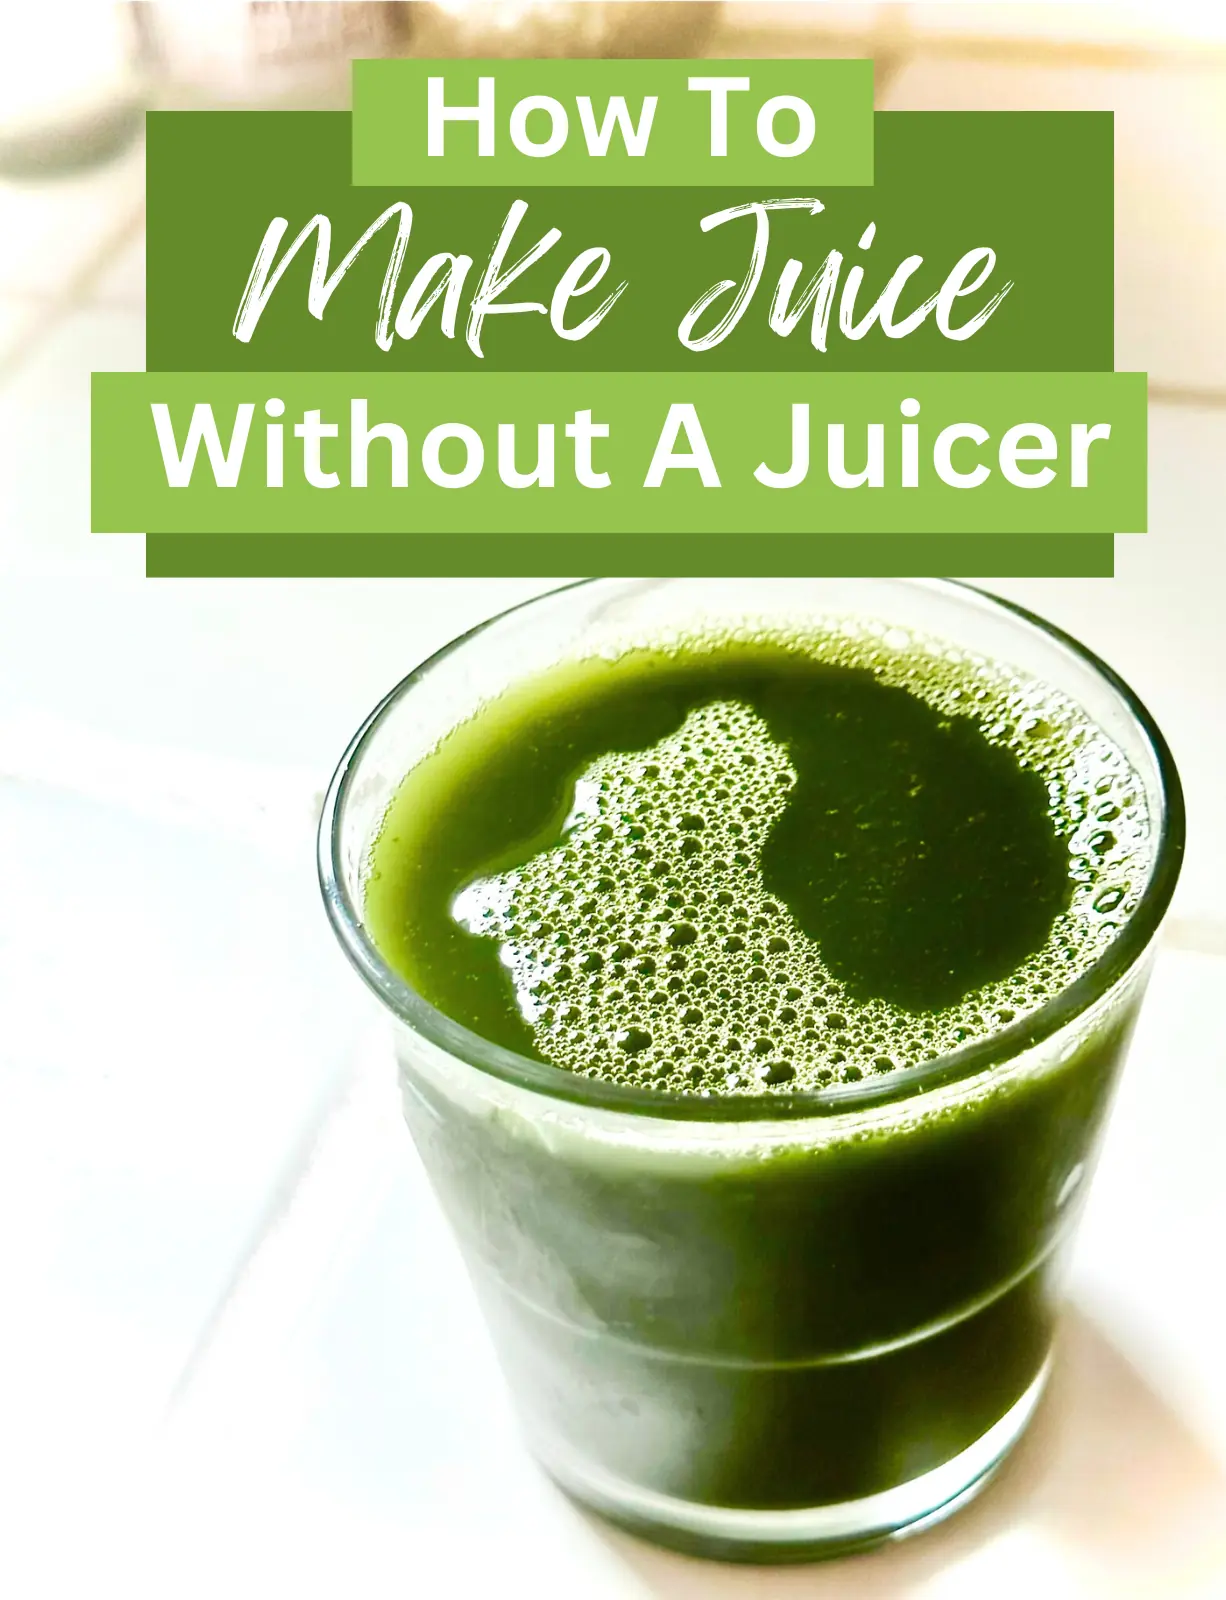 how to make juice without a juicer, can you make juice without a juicer, make juice with a blender, how to make juice with a blender, can you make juice with a blender, How to make green juice, Green juice recipe, Blender juice recipe, make juice with blender, make juice no juicer, How To Make Juice Without A Juicer, How To Make Juice With A Juicer, How To Make Apple Juice Without A Juicer, How To Make Celery Juice Without A Juicer, How To Make Carrot Juice Without A Juicer, How To Make Orange Juice Without A Juicer, How To Make Beet Juice Without A Juicer, How To Make Ginger Juice Without A Juicer, How To Make Green Juice Without A Juicer, How To Make Abc Juice Without A Juicer, How To Make Cabbage Juice Without A Juicer, How To Make Watermelon Juice Without A Juicer, How To Make Spinach Juice Without A Juicer, How To Make Pear Juice Without A Juicer, How To Make Fresh Juice Without A Juicer, Can I Make Juice Without A Juicer, Can I Make Celery Juice Without A Juicer, Can I Make Apple Juice Without A Juicer, Can You Make Juice Without A Juicer, Can I Make Apple Juice With A Juicer, Can I Make Juice With A Blender, How To Make Juice Without A Juicer, How To Make Juice With A Juicer, How Can I Make Carrot Juice Without A Juicer, Can You Make Celery Juice Without A Juicer, Can You Make Carrot Juice Without A Juicer, Can You Make Green Juice Without A Juicer, Can You Make Beet Juice Without A Juicer, Can You Make Orange Juice Without A Juicer, Can You Make Orange Juice With A Juicer, How Can I Make Juice Without A Juicer, Can You Make Juice Without A Juicer, How To Make Juice Without A Juicer, How To Make Juice With A Juicer, How Can I Make Carrot Juice Without A Juicer, How Can I Make Celery Juice Without A Juicer, How Can You Make Celery Juice Without A Juicer, Can You Make Carrot Juice Without A Juicer, Can You Make Green Juice Without A Juicer, Can You Make Apple Juice Without A Juicer, Can You Make Beet Juice Without A Juicer, Can You Make Orange Juice Without A Juicer, How Can I Make Juice With A Blender, Can You Make Orange Juice With A Juicer, Can You Make Apple Juice With A Juicer, How Do You Make Juice Without A Juicer, How Do I Make Juice Without A Juicer, How To Make Juice Without A Juicer, How To Make Juice With A Juicer, How Do You Make Celery Juice Without A Juicer, How Do You Make Beetroot Juice Without A Juicer, How Do You Make Carrot Juice Without A Juicer, How Do You Make Beet Juice Without A Juicer, How Do You Make Apple Juice Without A Juicer, How Do I Make Celery Juice Without A Juicer, How Can I Make Carrot Juice Without A Juicer, How Can I Make Celery Juice Without A Juicer, How Do You Make Juice With A Blender, How Can I Make Juice With A Blender, How To Make Orange Juice Without A Juicer, How To Make Juice Without A Juicer, How To Make Juice With A Juicer, How To Make Apple Juice Without A Juicer, How To Make Celery Juice Without A Juicer, How To Make Carrot Juice Without A Juicer, How To Make Orange Juice Without A Juicer, How To Make Beet Juice Without A Juicer, How To Make Ginger Juice Without A Juicer, How To Make Green Juice Without A Juicer, How To Make Abc Juice Without A Juicer, How To Make Cabbage Juice Without A Juicer, How To Make Watermelon Juice Without A Juicer, How To Make Spinach Juice Without A Juicer, How To Make Pear Juice Without A Juicer, How To Make Fresh Juice Without A Juicer, Can I Make Juice Without A Juicer, How To Make Juice Without A Juicer, How To Make Juice With A Juicer, Can I Make Celery Juice Without A Juicer, Can I Make Apple Juice Without A Juicer, Can You Make Juice Without A Juicer, Can I Make Apple Juice With A Juicer, Can I Make Juice With A Blender, Can You Juice Without A Juicer, What To Do If You Don't Have A Juicer, How To Make Juice If You Don't Have A Juicer, How To Juice Without A Juicer, Can You Make Orange Juice Without A Juicer, How To Make Homemade Juice Without A Juicer, How To Make Juice Without Juicer Or Blender, How To Make Juice Without A Juicer, How To Make Juice With A Juicer, How To Make Apple Juice Without A Juicer, How To Make Celery Juice Without A Juicer, How To Make Carrot Juice Without A Juicer, How To Make Orange Juice Without A Juicer, How To Make Beet Juice Without A Juicer, How To Make Ginger Juice Without A Juicer, How To Make Green Juice Without A Juicer, How To Make Abc Juice Without A Juicer, How To Make Cabbage Juice Without A Juicer, How To Make Watermelon Juice Without A Juicer, How To Make Spinach Juice Without A Juicer, How To Make Pear Juice Without A Juicer, How To Make Fresh Juice Without A Juicer, How To Make Juice Without A Juicer, How To Make Juice With A Juicer, How To Make Apple Juice Without A Juicer, How To Make Celery Juice Without A Juicer, How To Make Carrot Juice Without A Juicer, How To Make Orange Juice Without A Juicer, How To Make Beet Juice Without A Juicer, How To Make Ginger Juice Without A Juicer, How To Make Green Juice Without A Juicer, How To Make Abc Juice Without A Juicer, How To Make Cabbage Juice Without A Juicer, How To Make Watermelon Juice Without A Juicer, How To Make Spinach Juice Without A Juicer, How To Make Pear Juice Without A Juicer, How To Make Fresh Juice Without A Juicer,